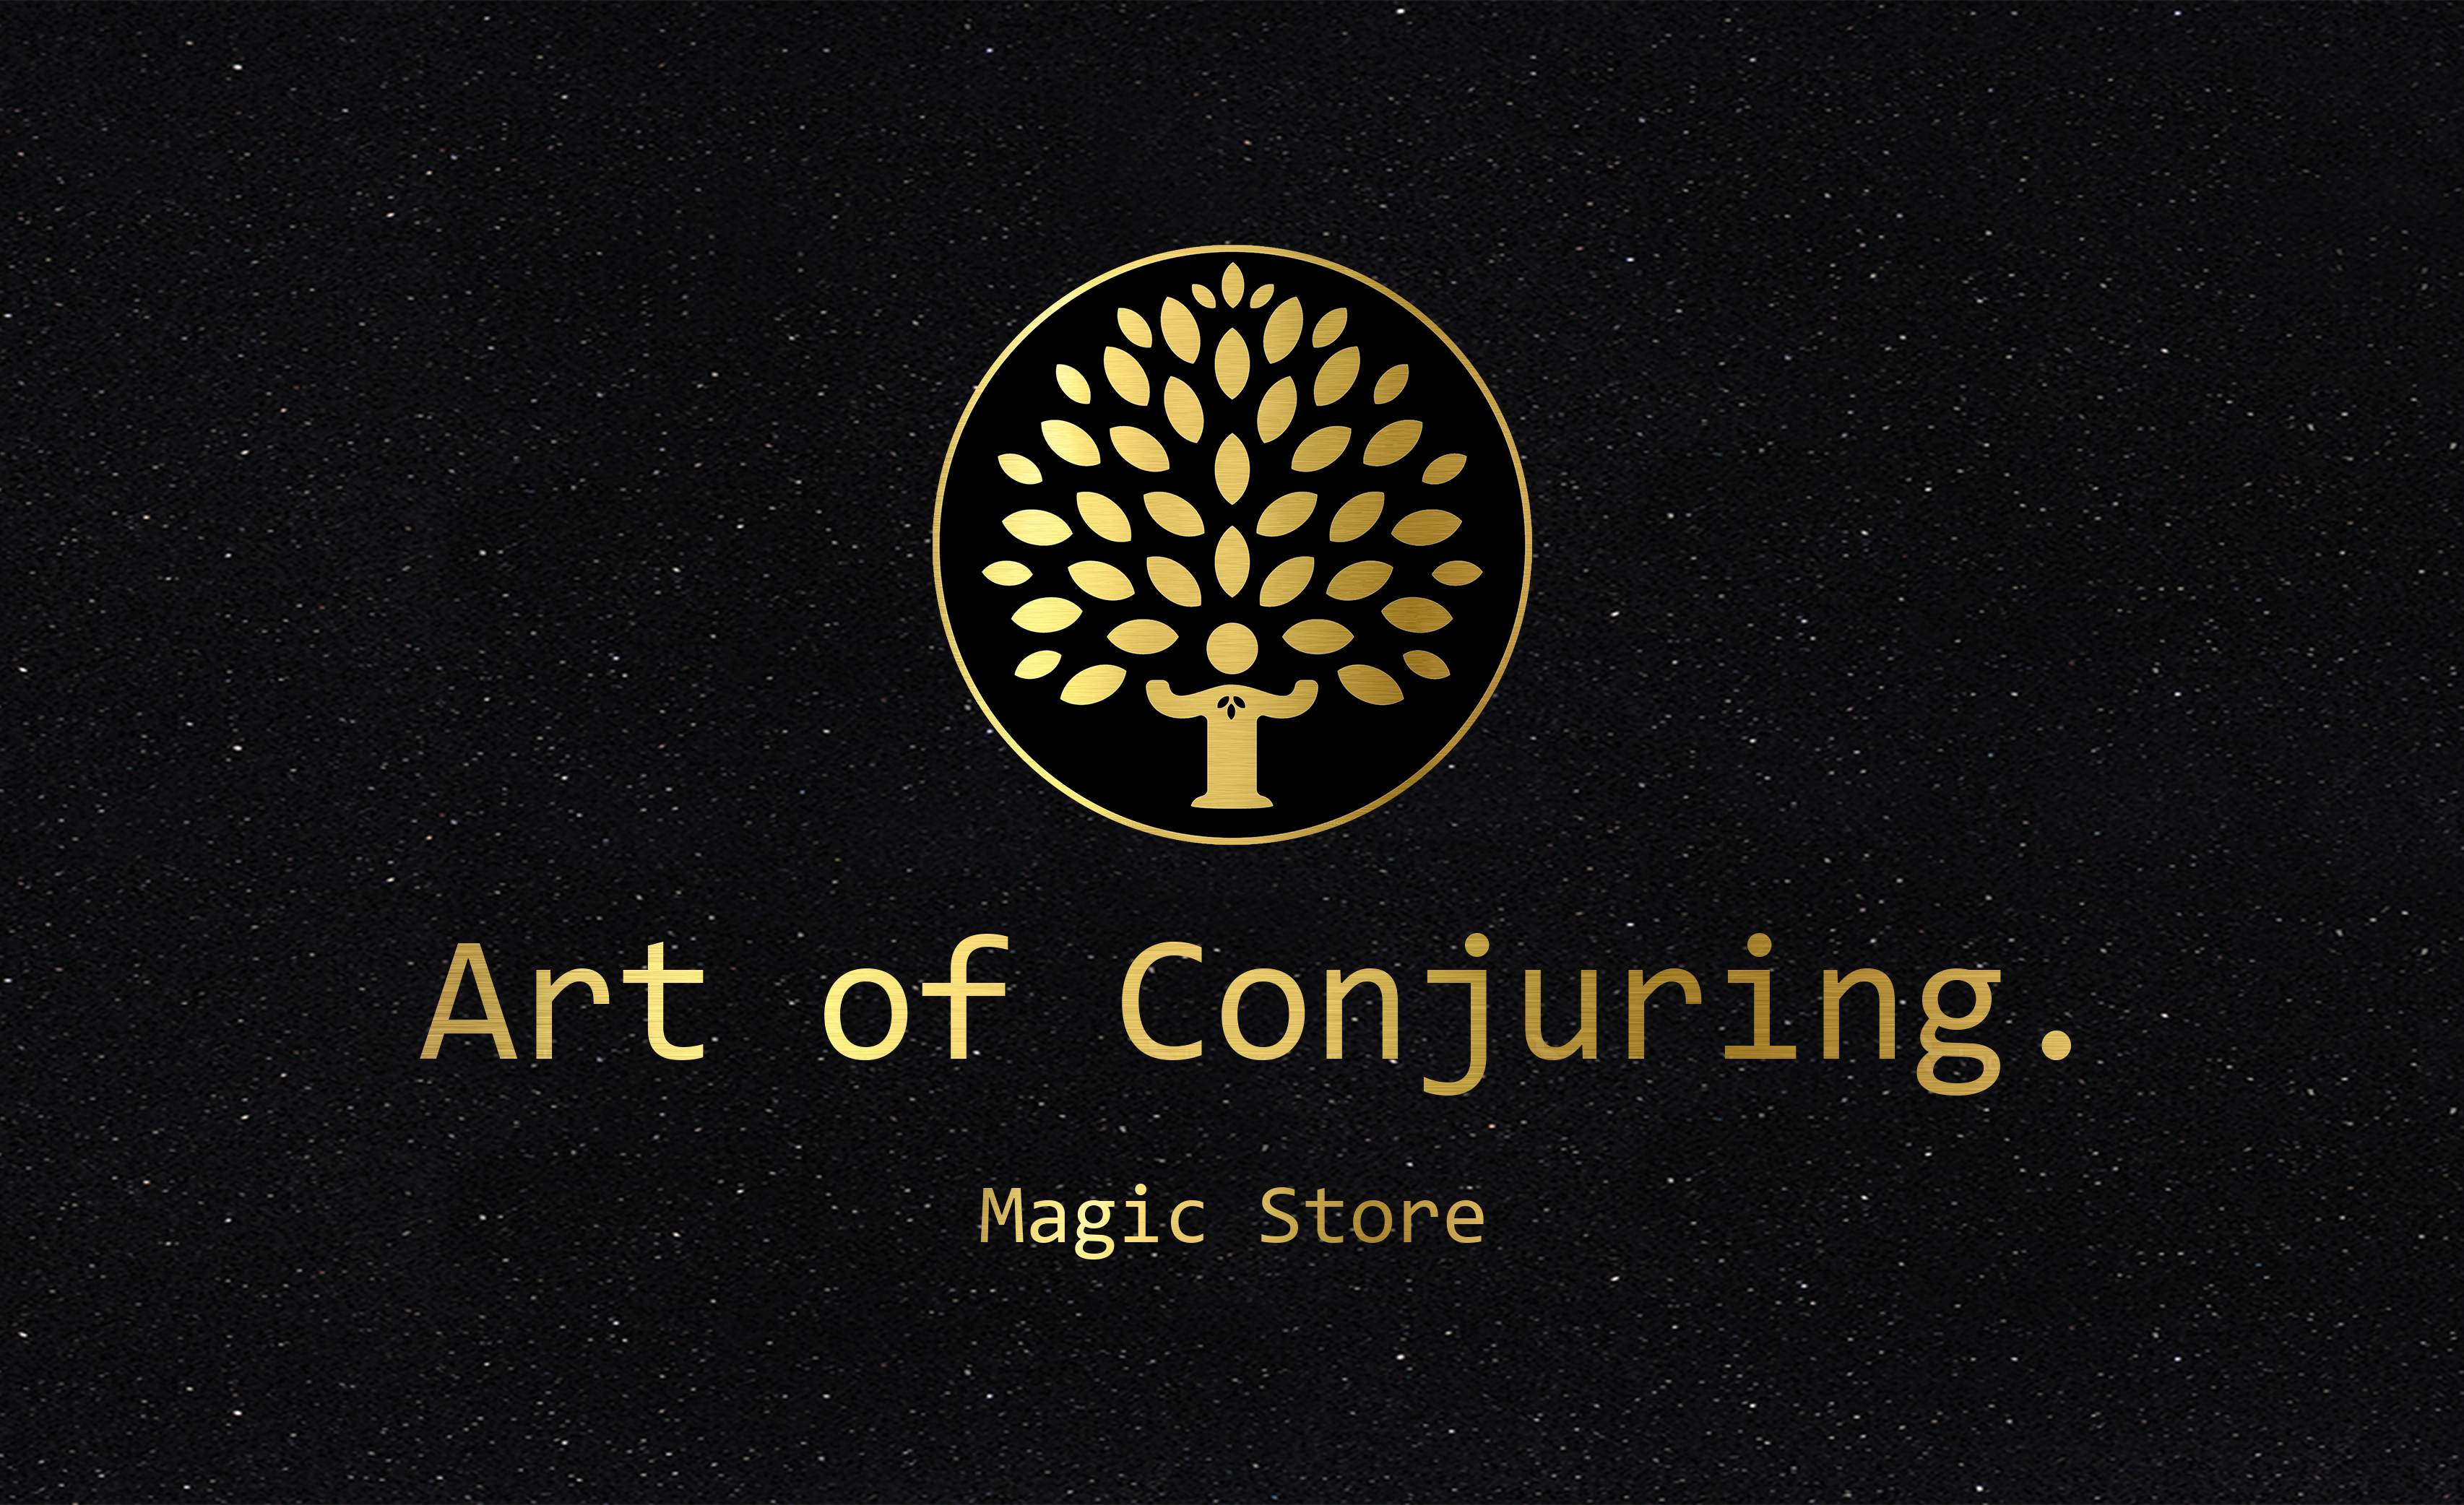 Art of Conjuring